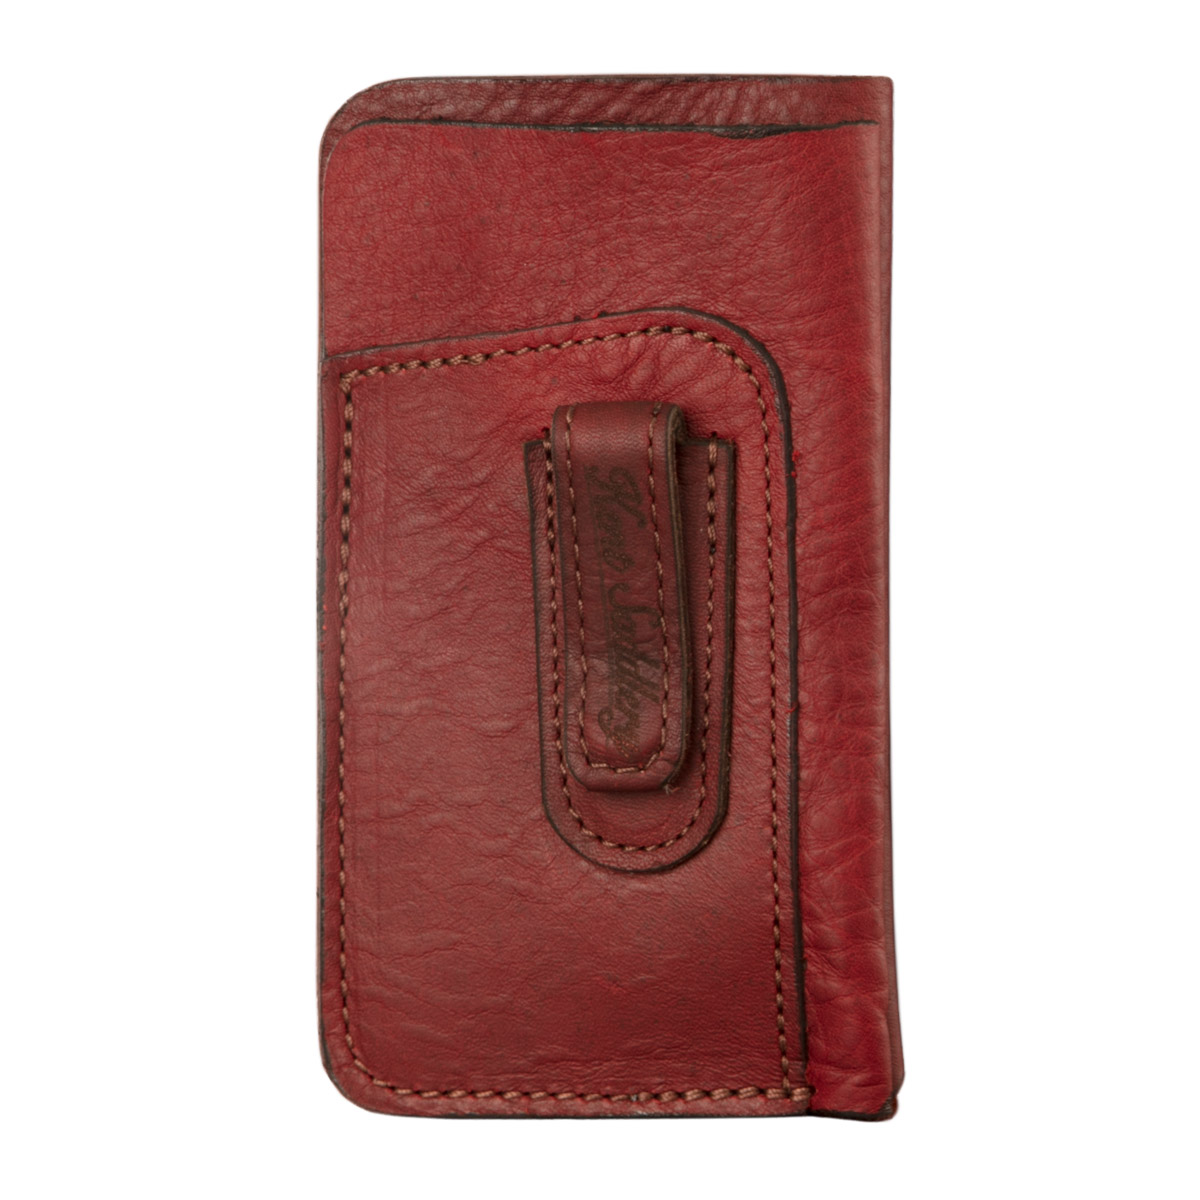 Glasses & Mobile Case, Soft Leather with Pen Holder and Pocket Clip 4